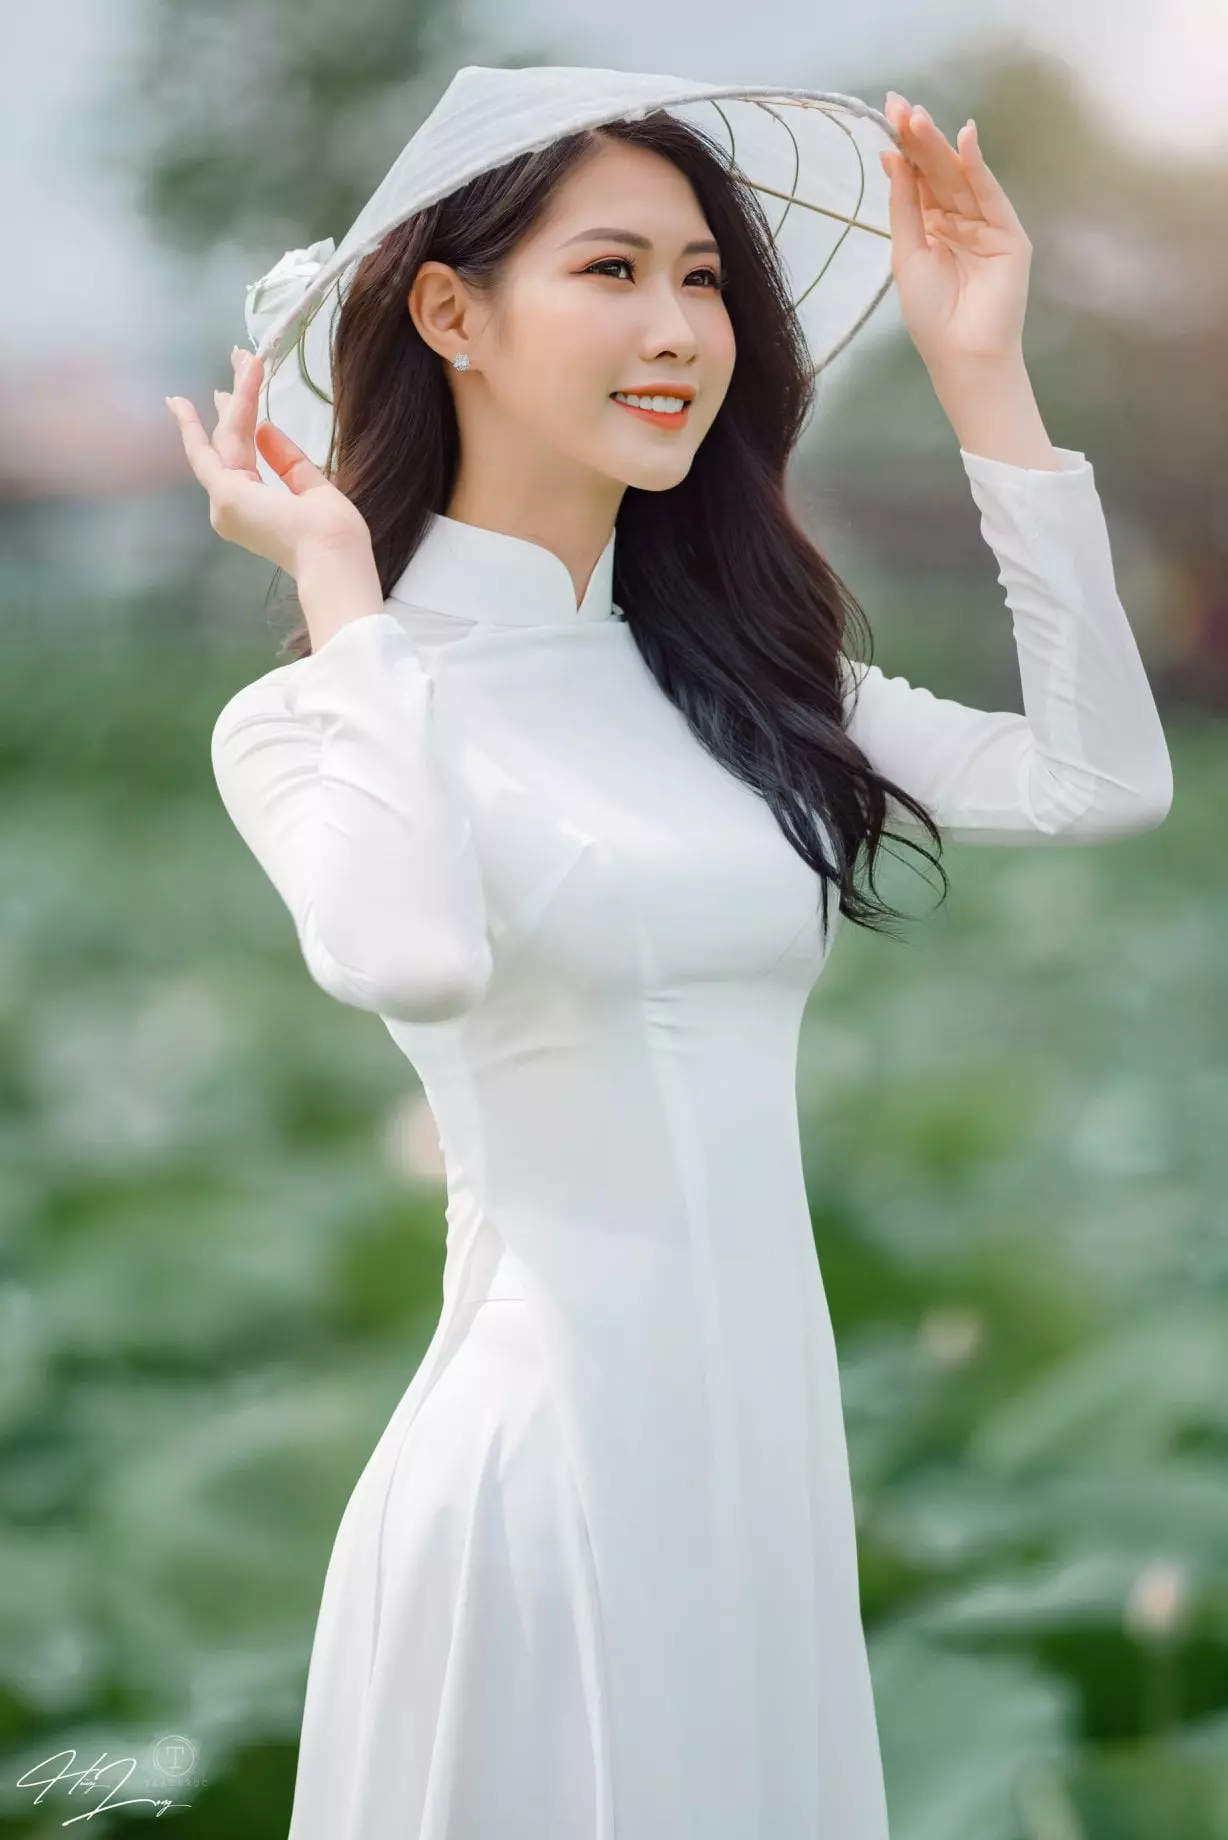 Ao Dai is the symbol of Vietnamese people